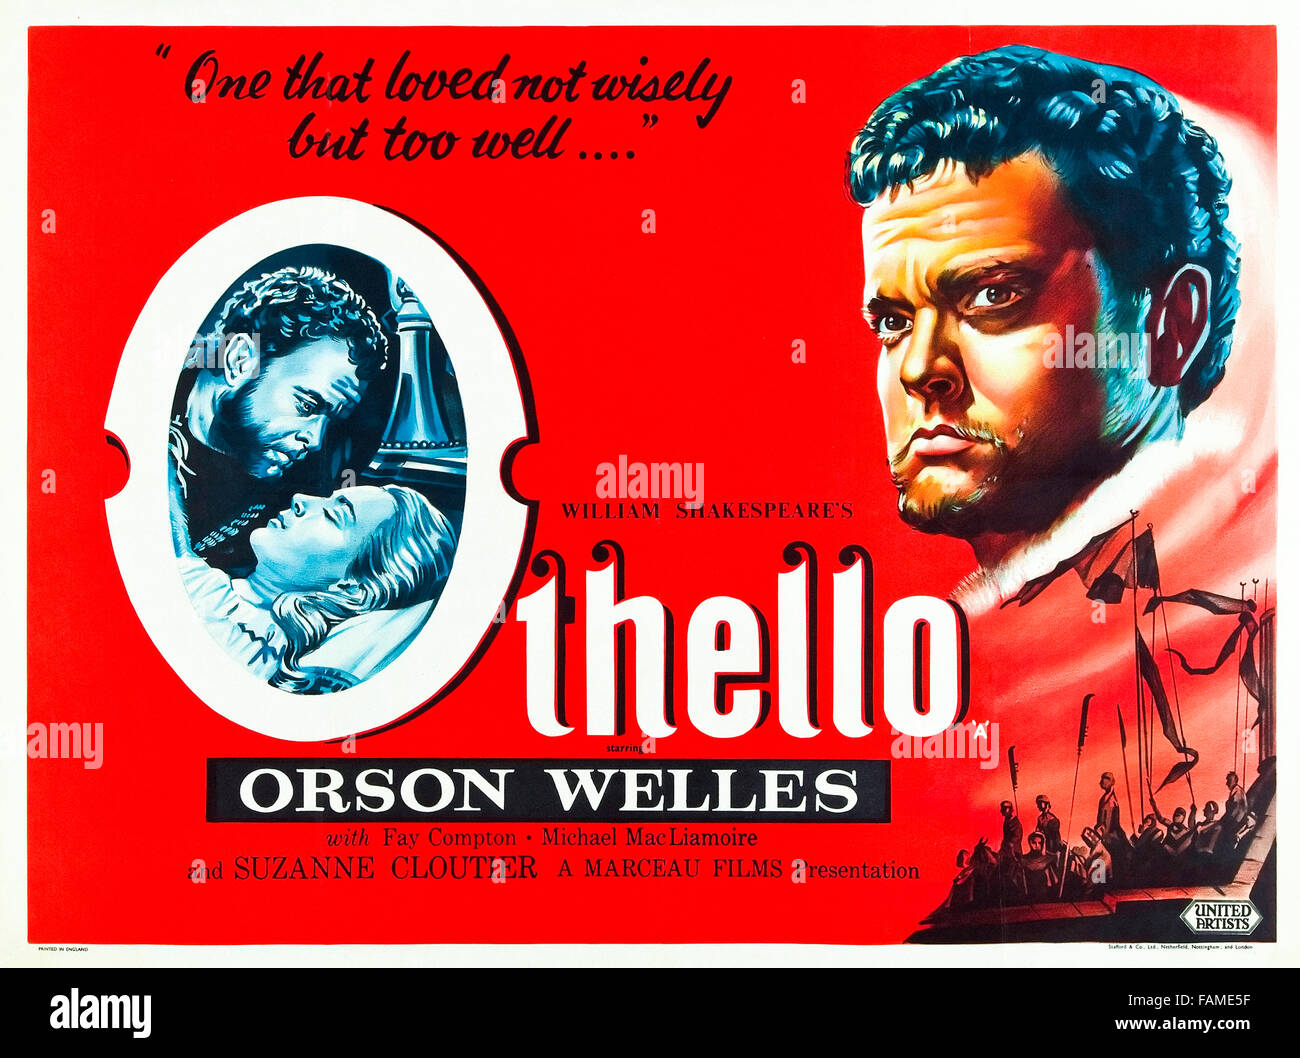 Othello (1951) directed by Orson Welles and starring Orson Welles, Micheál MacLiammóir, Robert Coote and Fay Compton. Welles overcomes production difficulties and a low budget in his adaptation of Shakespeare’s Othello which includes his own star performance as the moor of Venice. Stock Photo